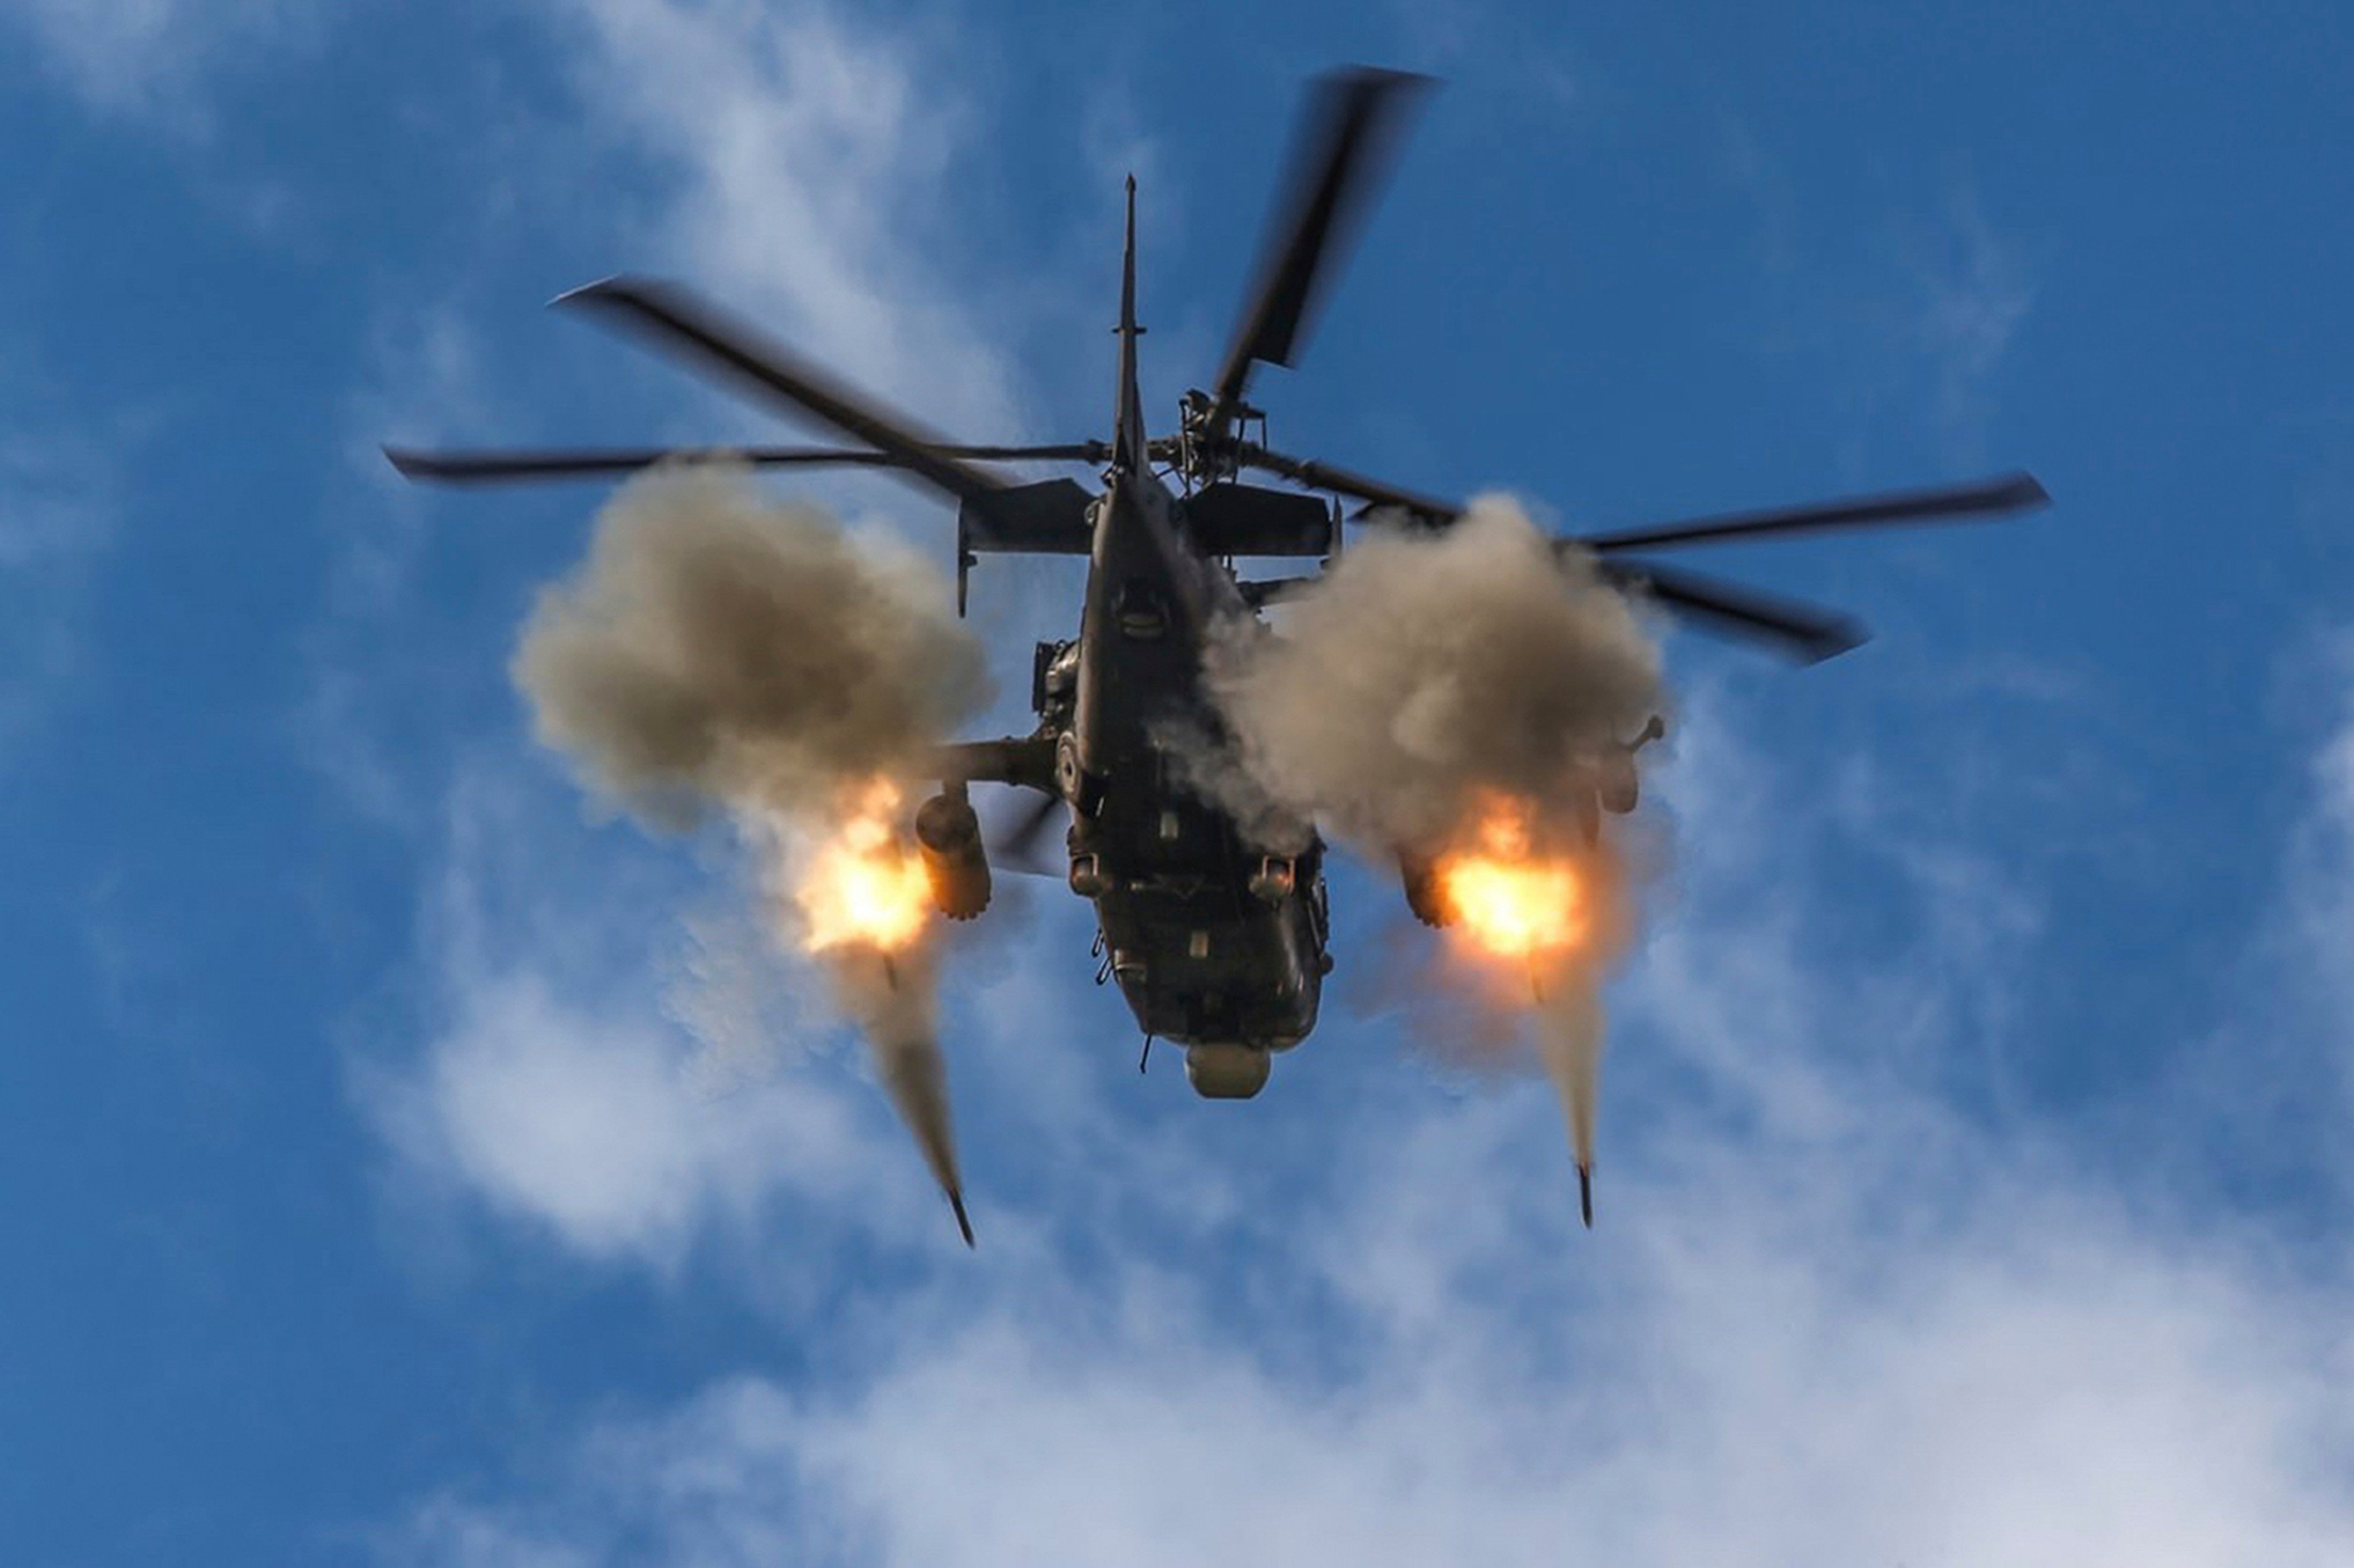 A helicopter gunship is seen firing rockets. Witnesses said a Myanmar military helicopter fired at the site in Kanbalu township after a jet had dropped bombs on the area. Photo: Russian Defence Ministry Press Service via AP